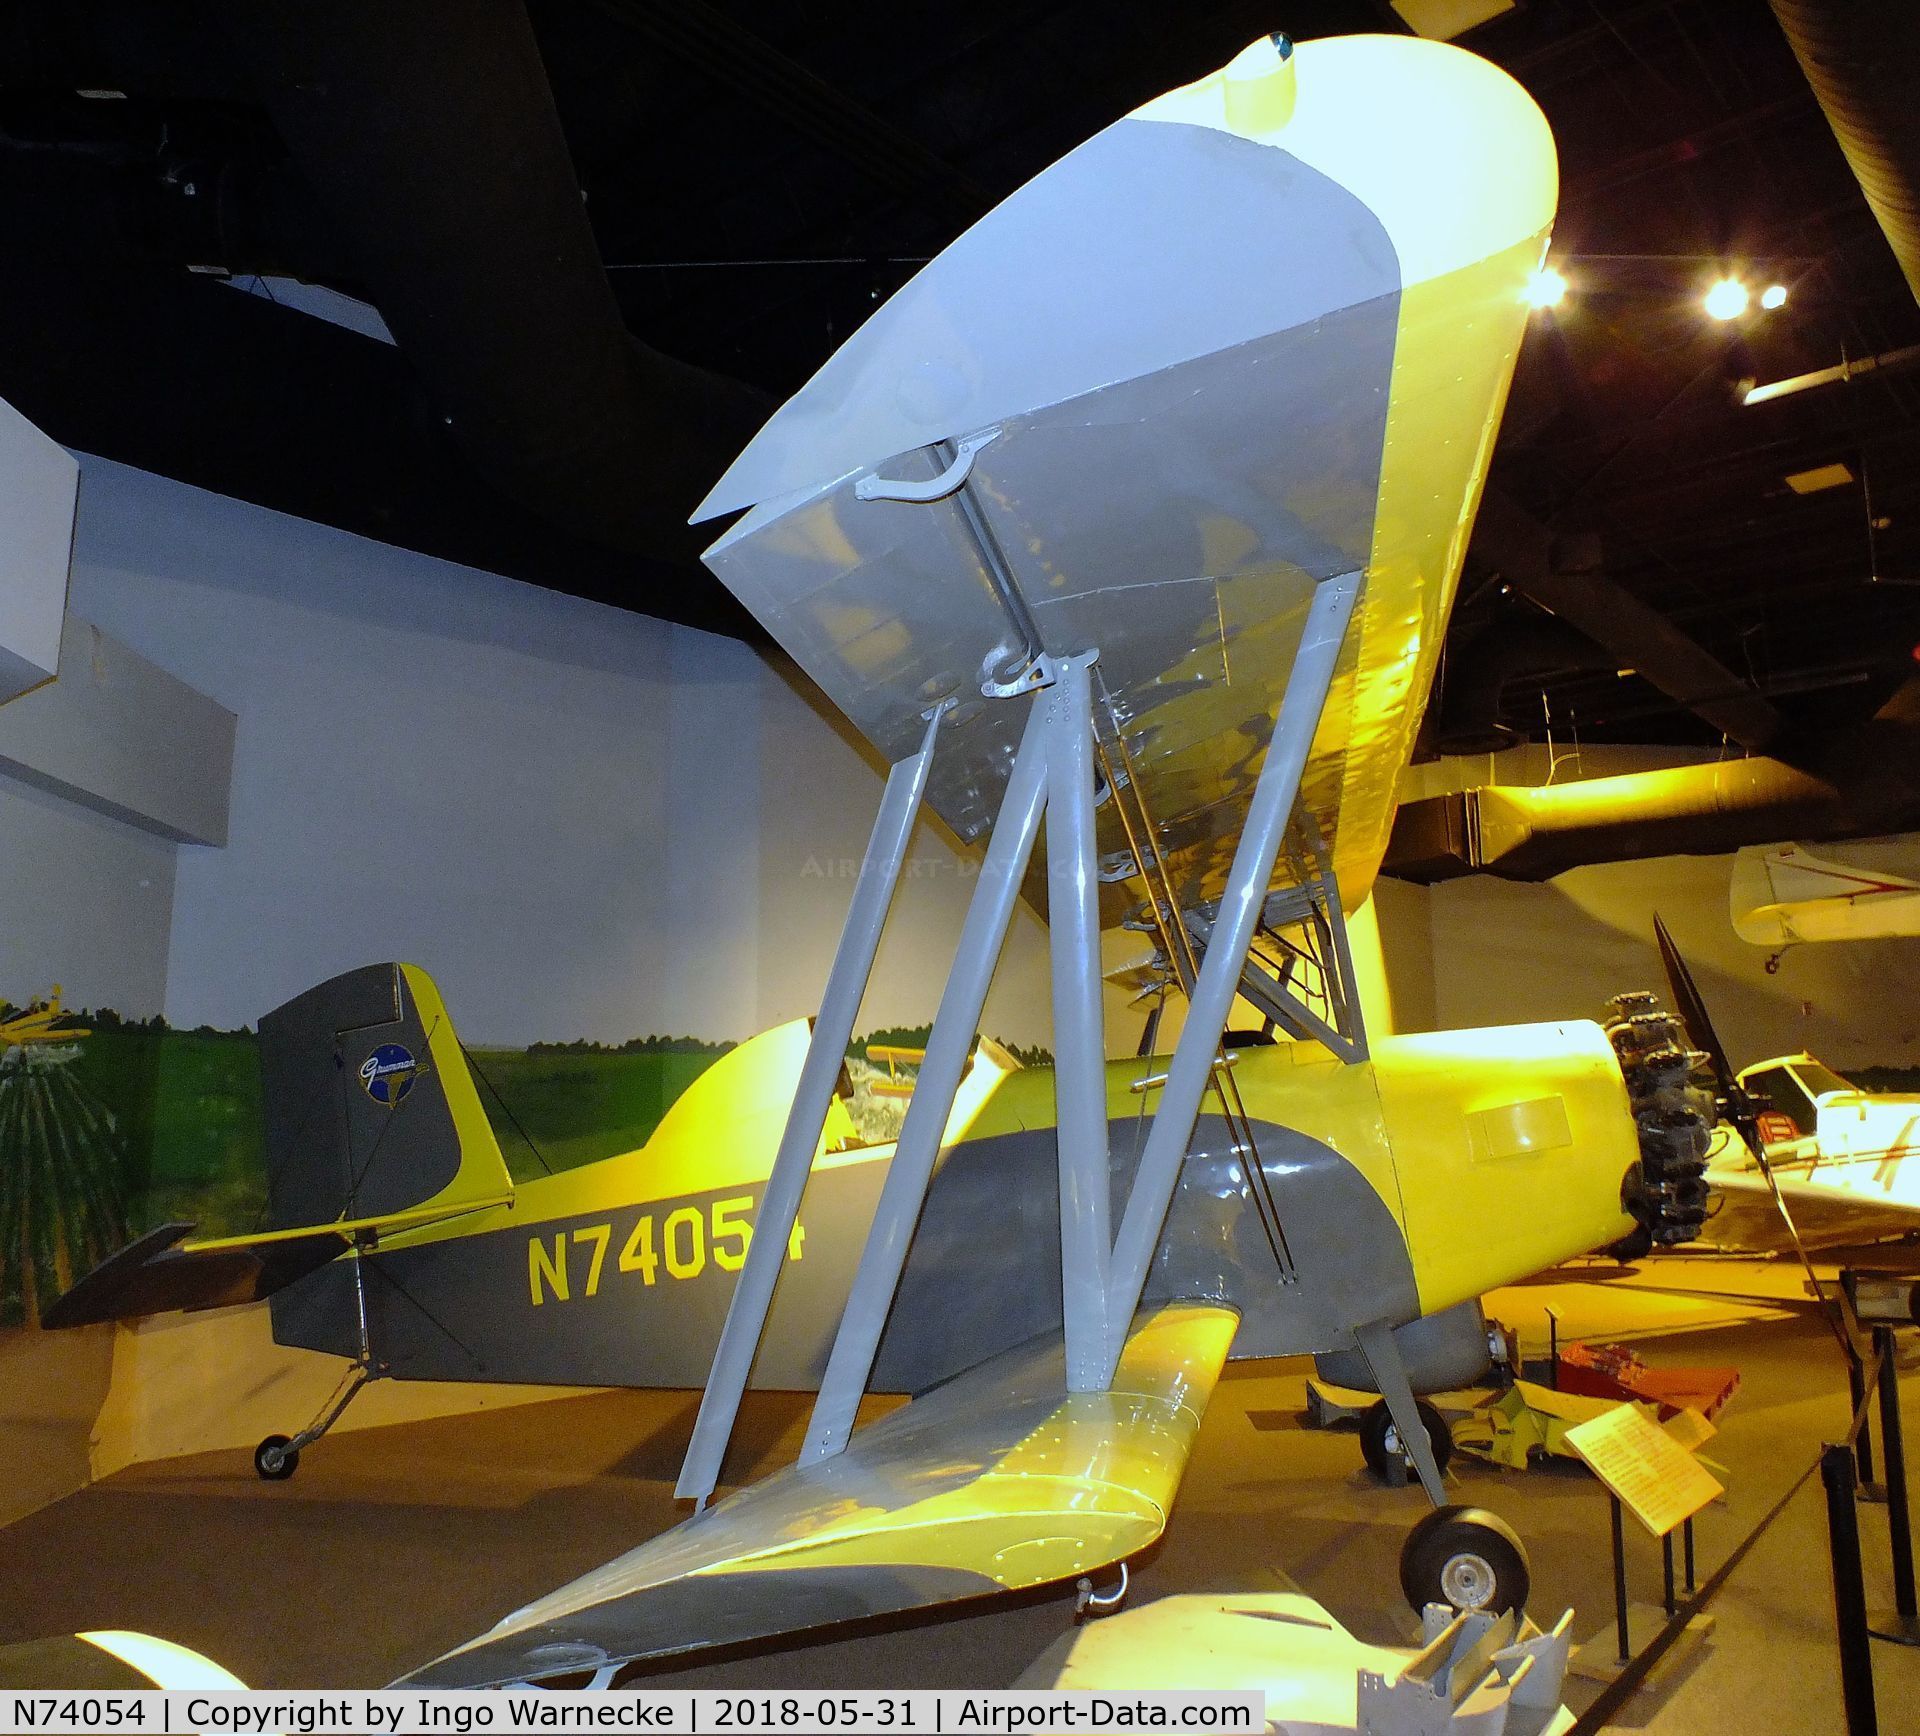 N74054, 1957 Grumman G-164 C/N X-1, Grumman G-164 Ag-Cat at the Mississippi Agriculture & Forestry Museum, Jackson MS